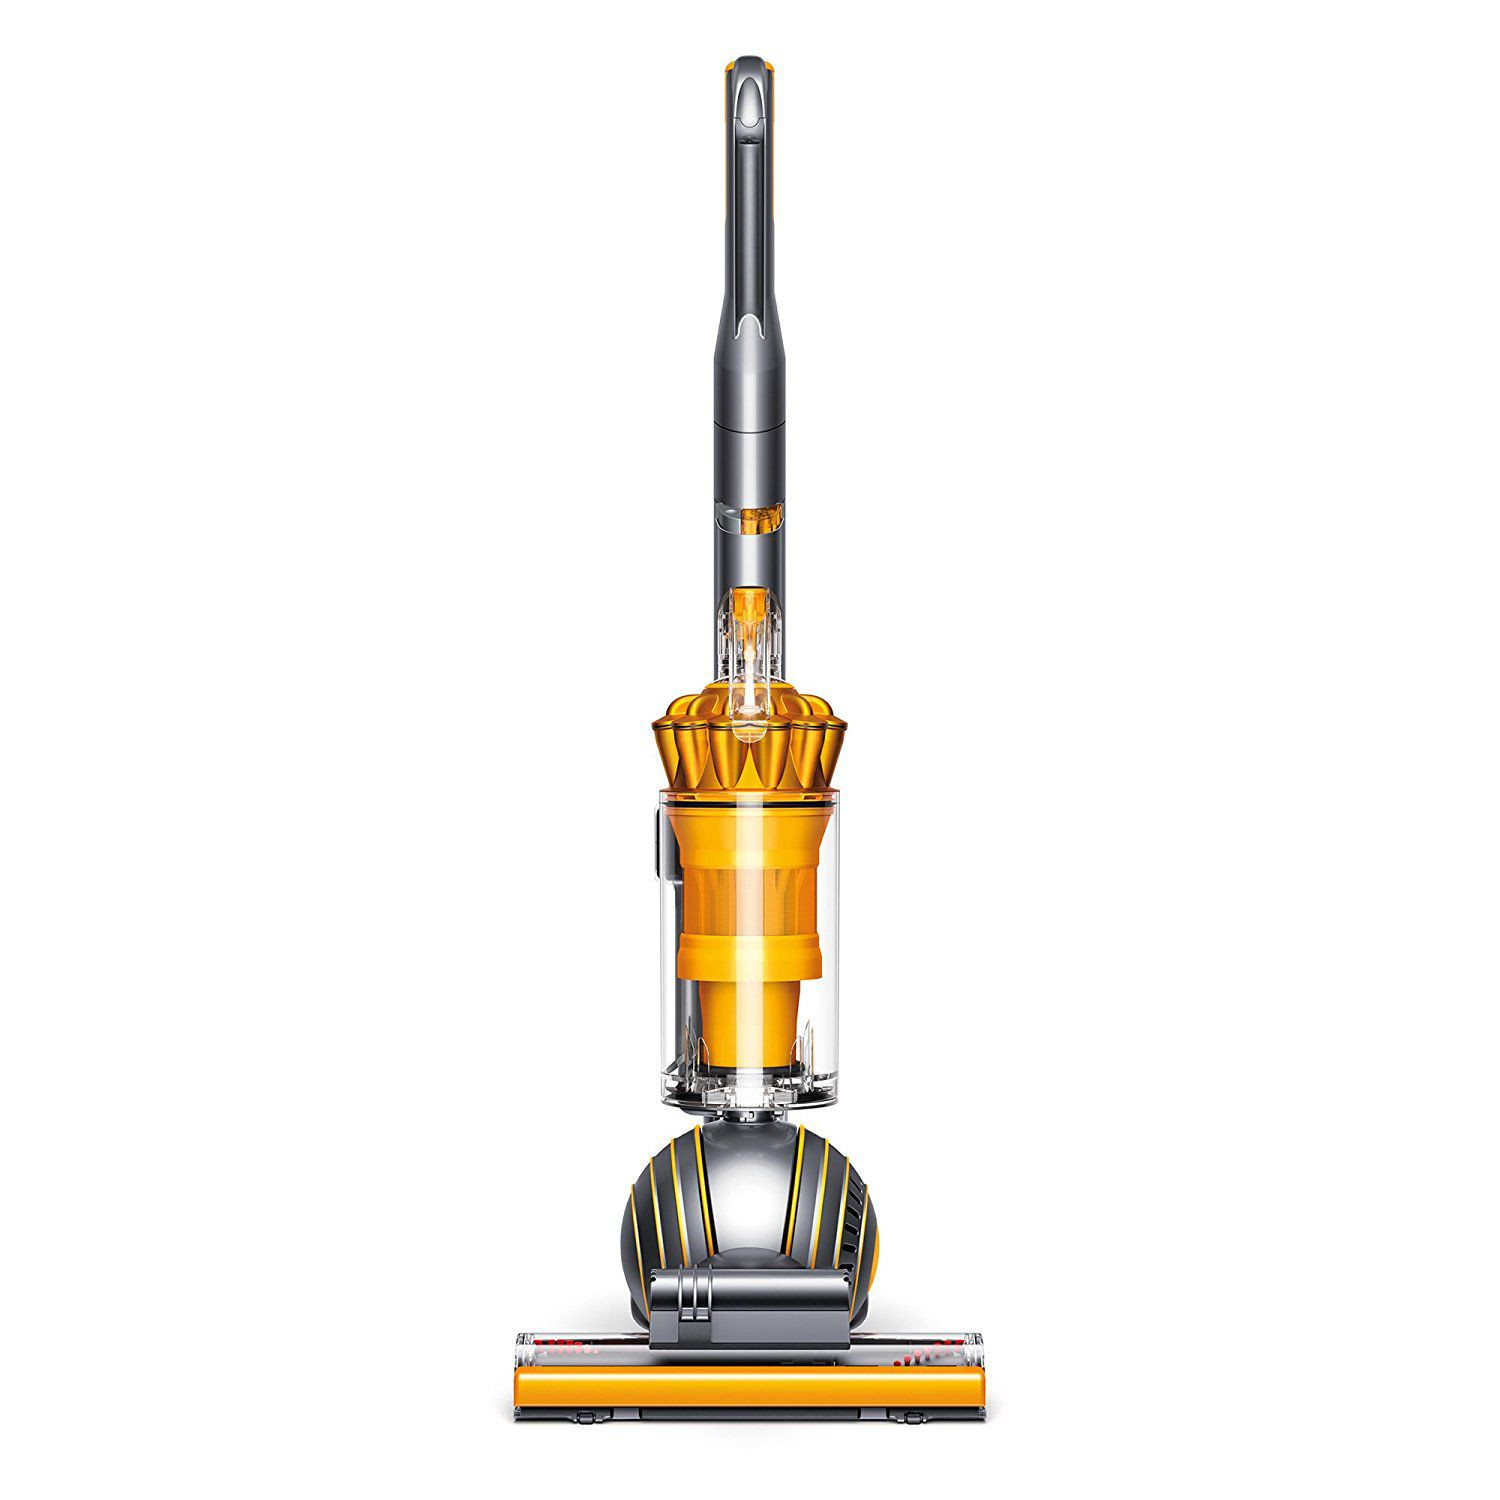 cheap hardwood floor vacuum of the 10 best vacuum cleaners to buy in 2018 with best design dyson ball multi floor 2 upright vacuum buy on amazon